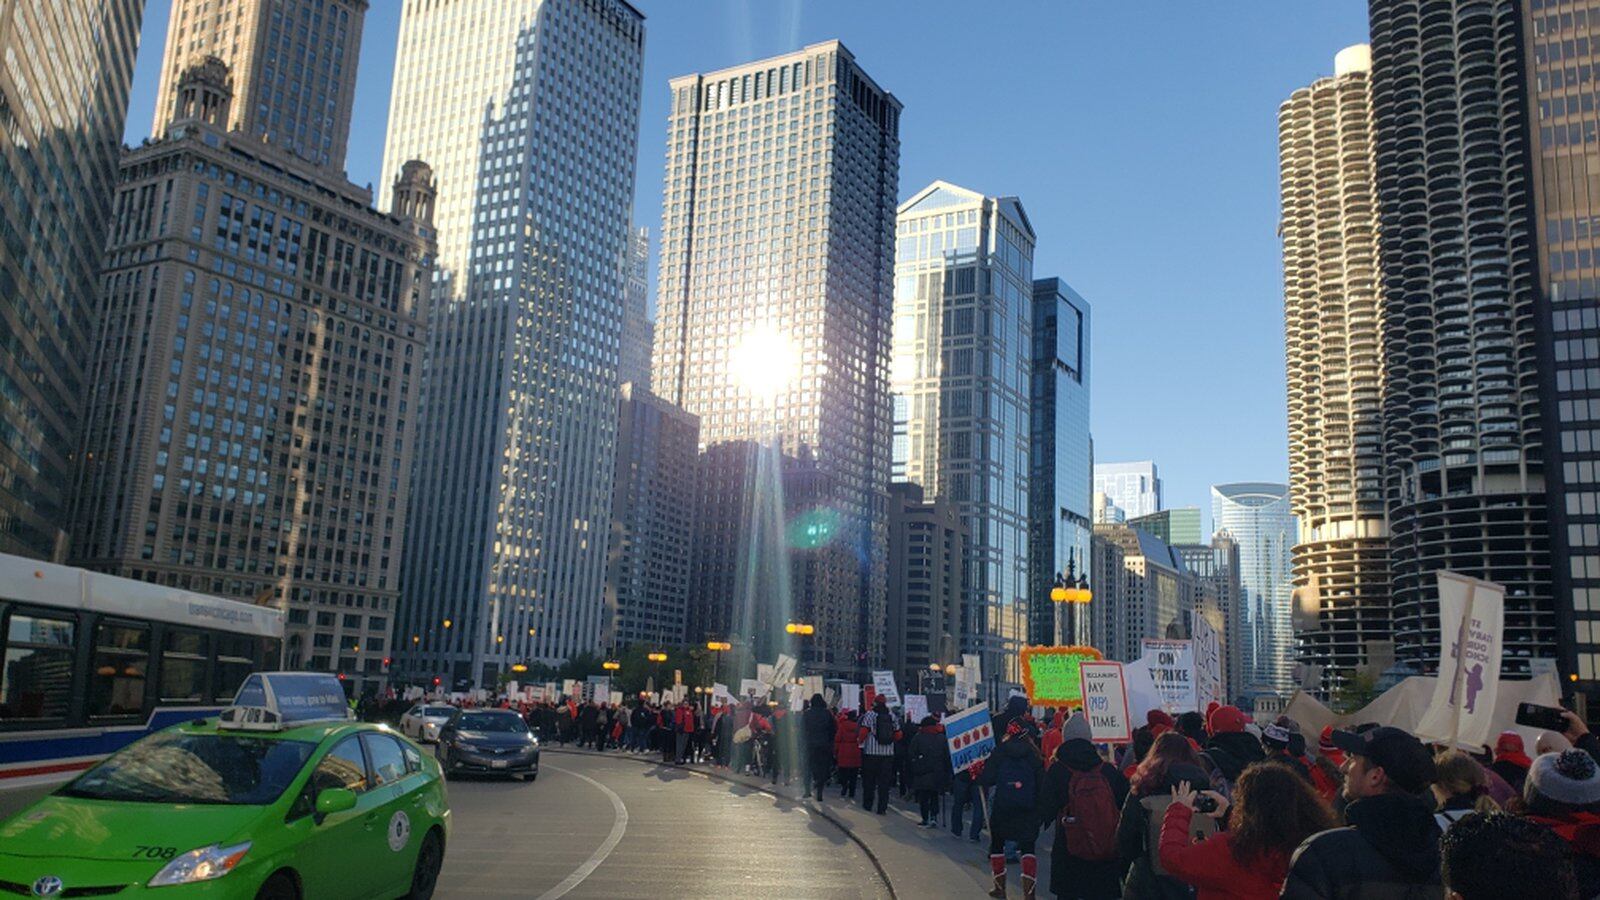 Chicago Teachers Union members lined Wacker Drive in preparation for a march to City Hall and rally on the fifth day of their strike, Oct. 23, 2019.